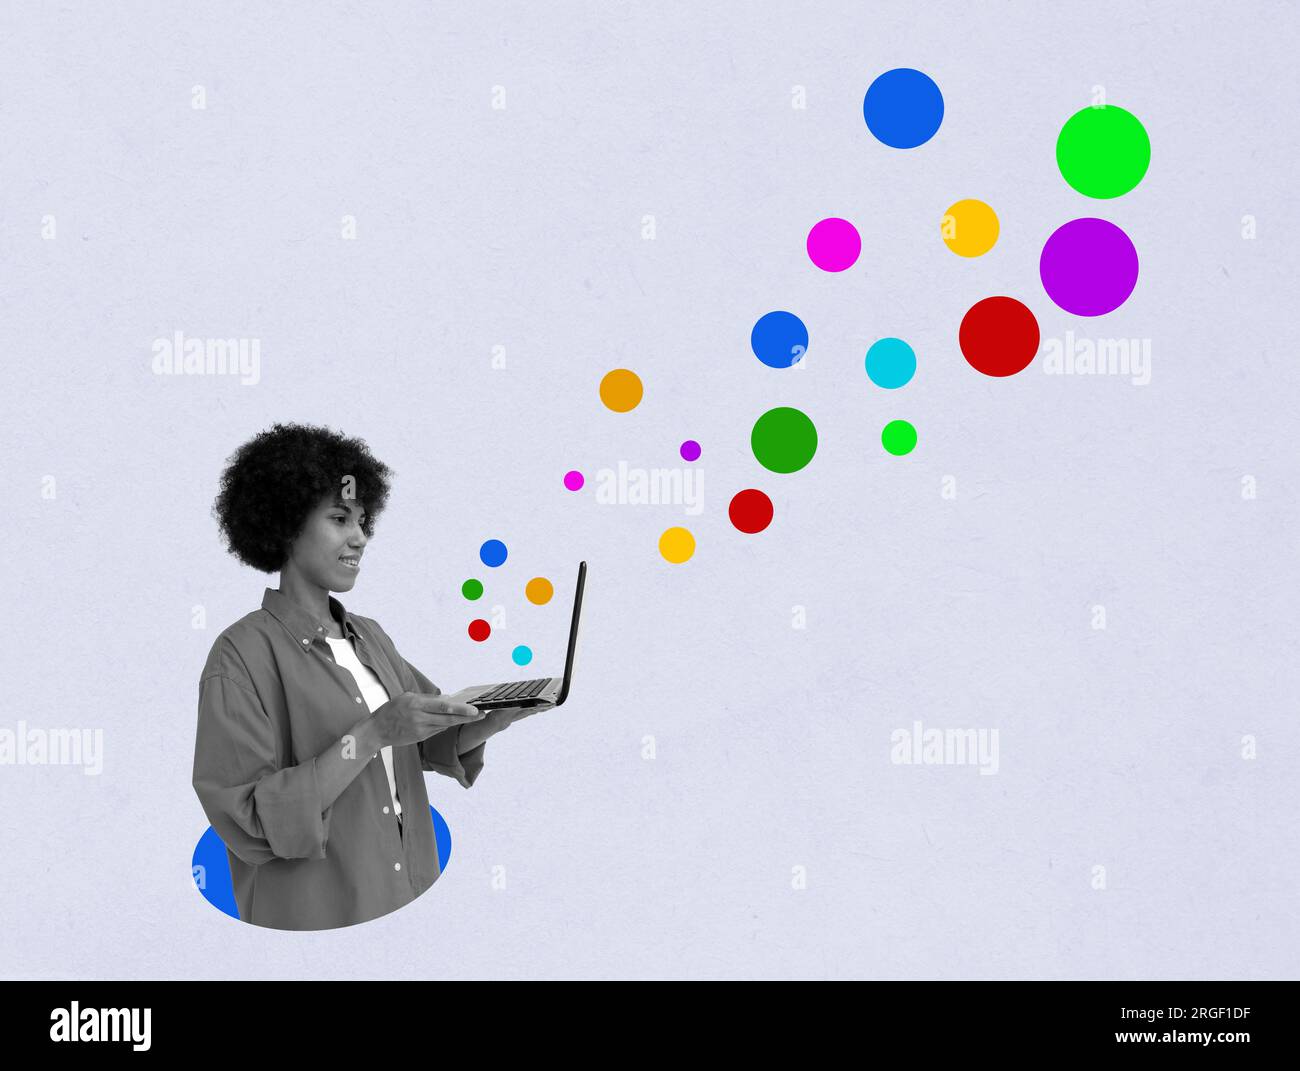 Collage with woman working on a laptop and colorful circles as a symbol of new ideas and creativity in blogging. Stock Photo